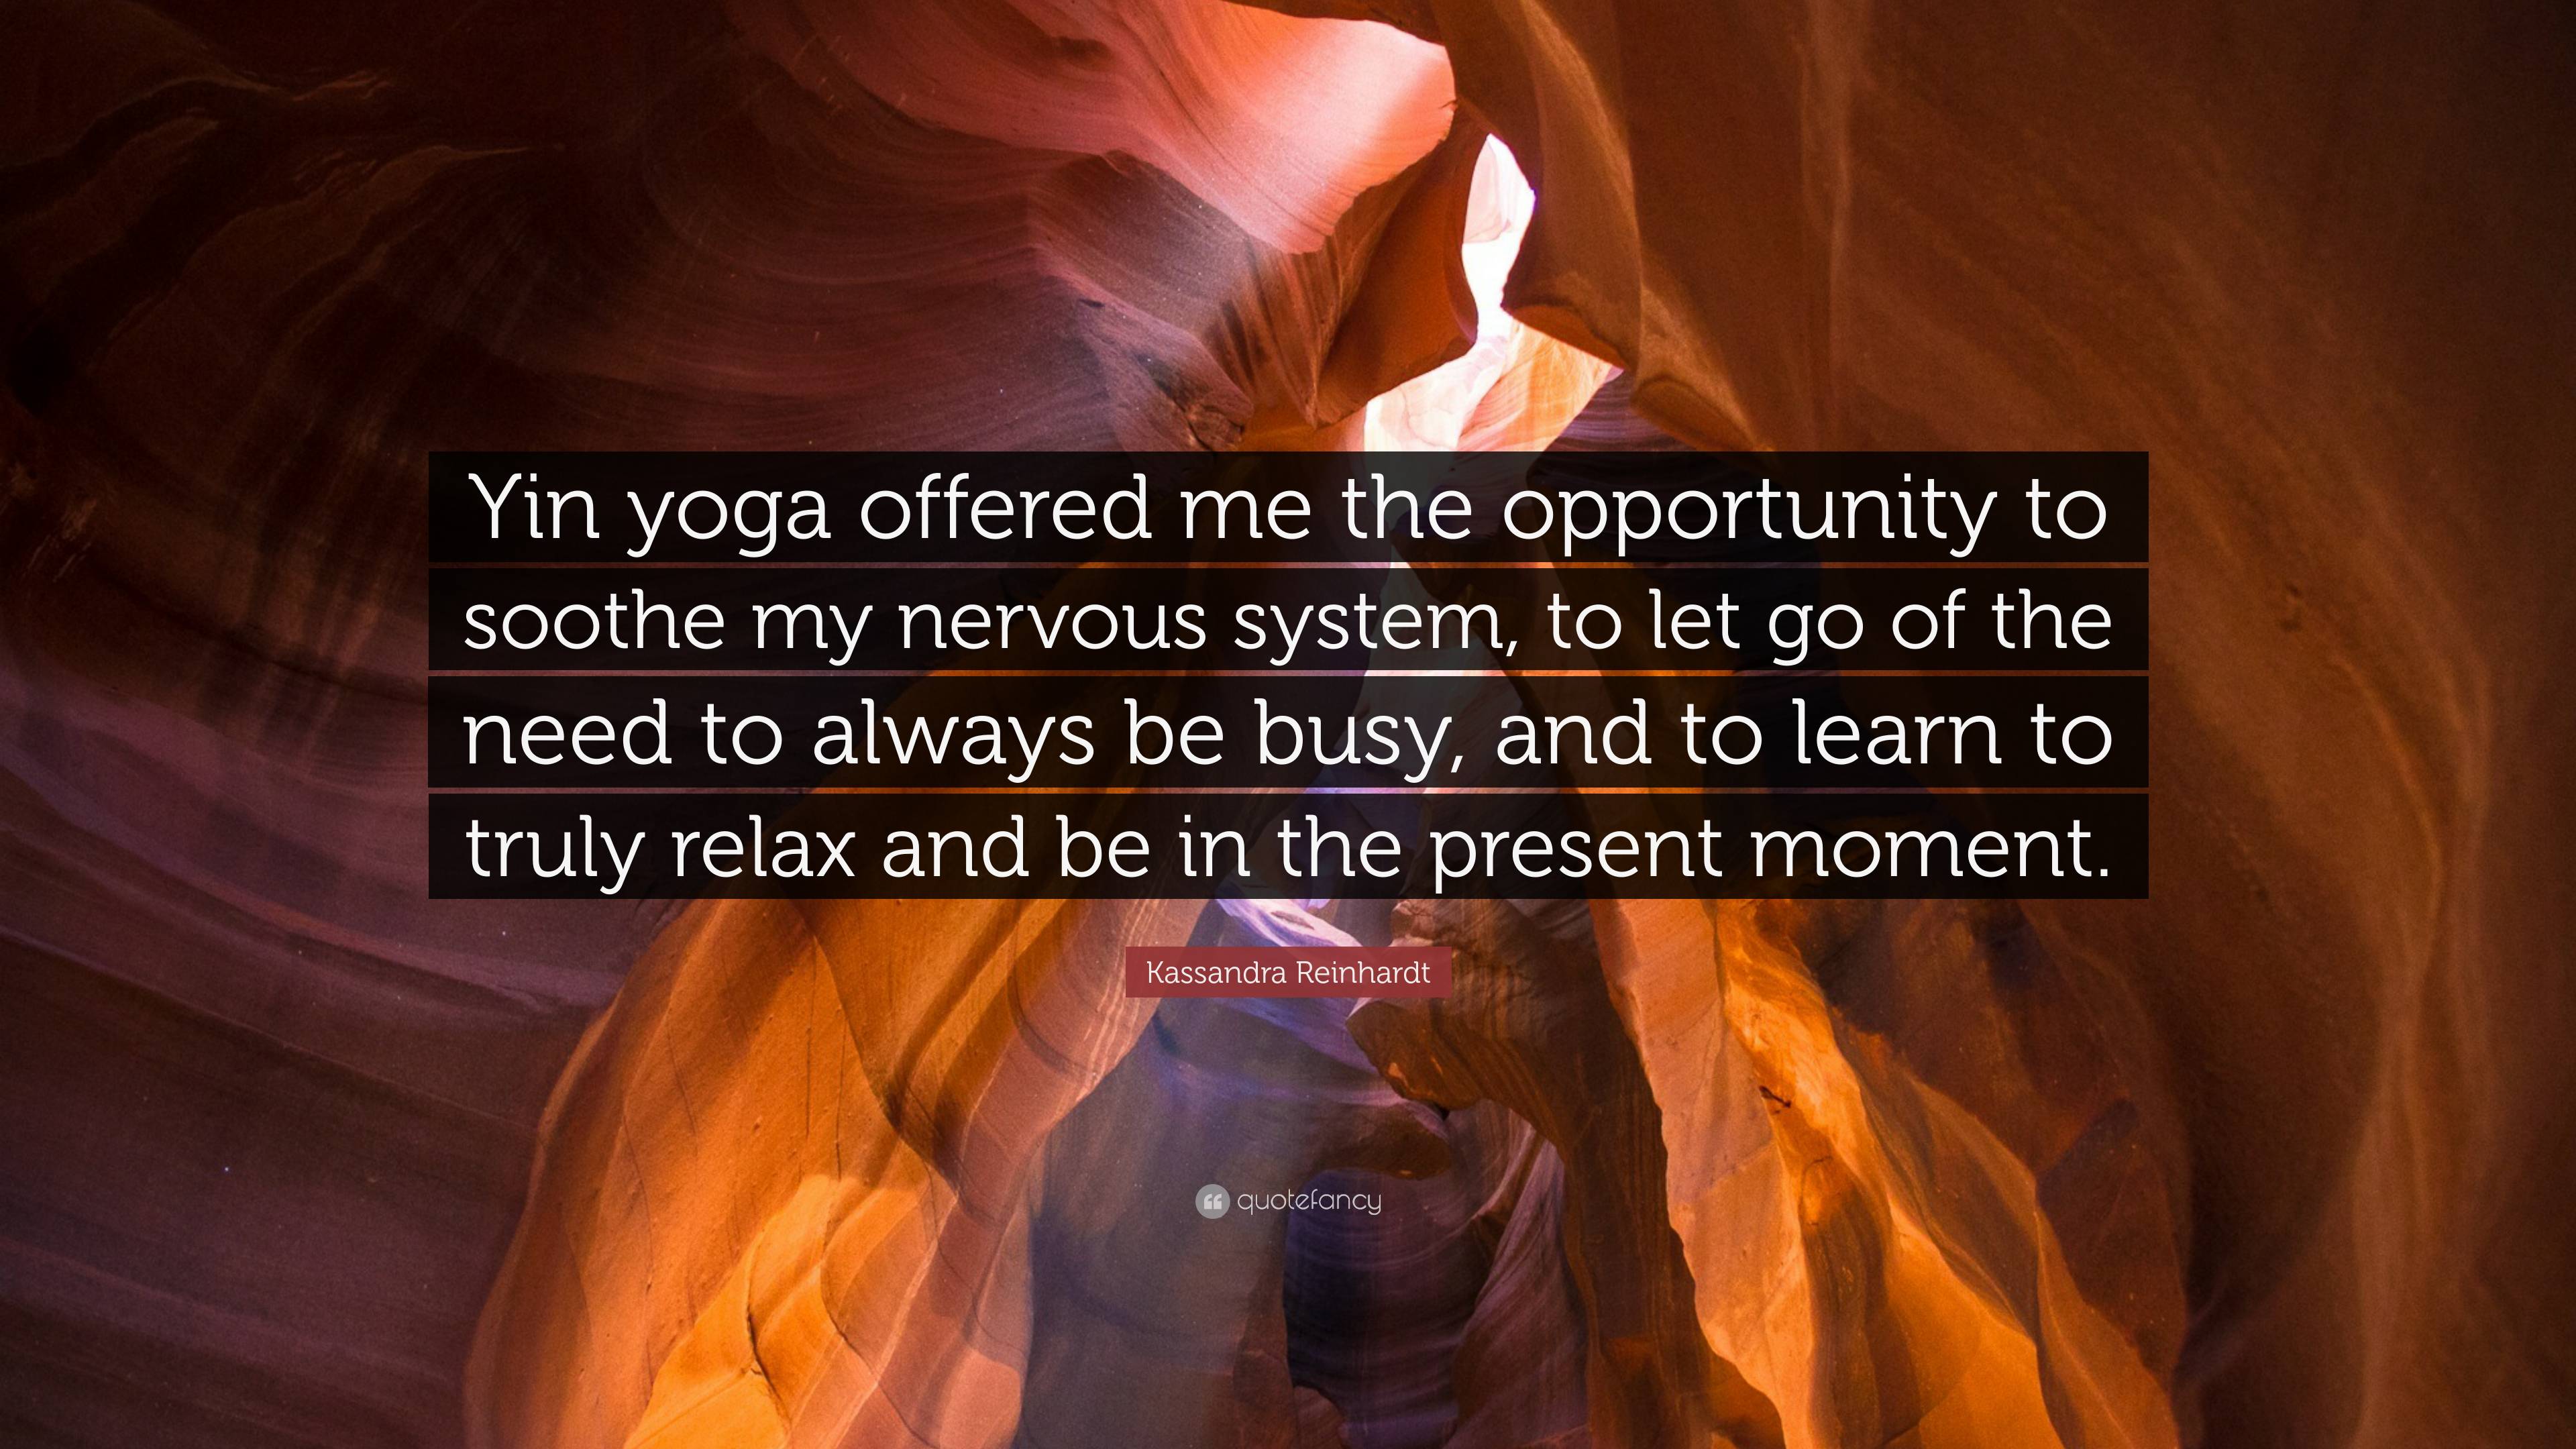 Kassandra Reinhardt Quote: “Yin yoga offered me the opportunity to soothe  my nervous system, to let go of the need to always be busy, and to learn  t”